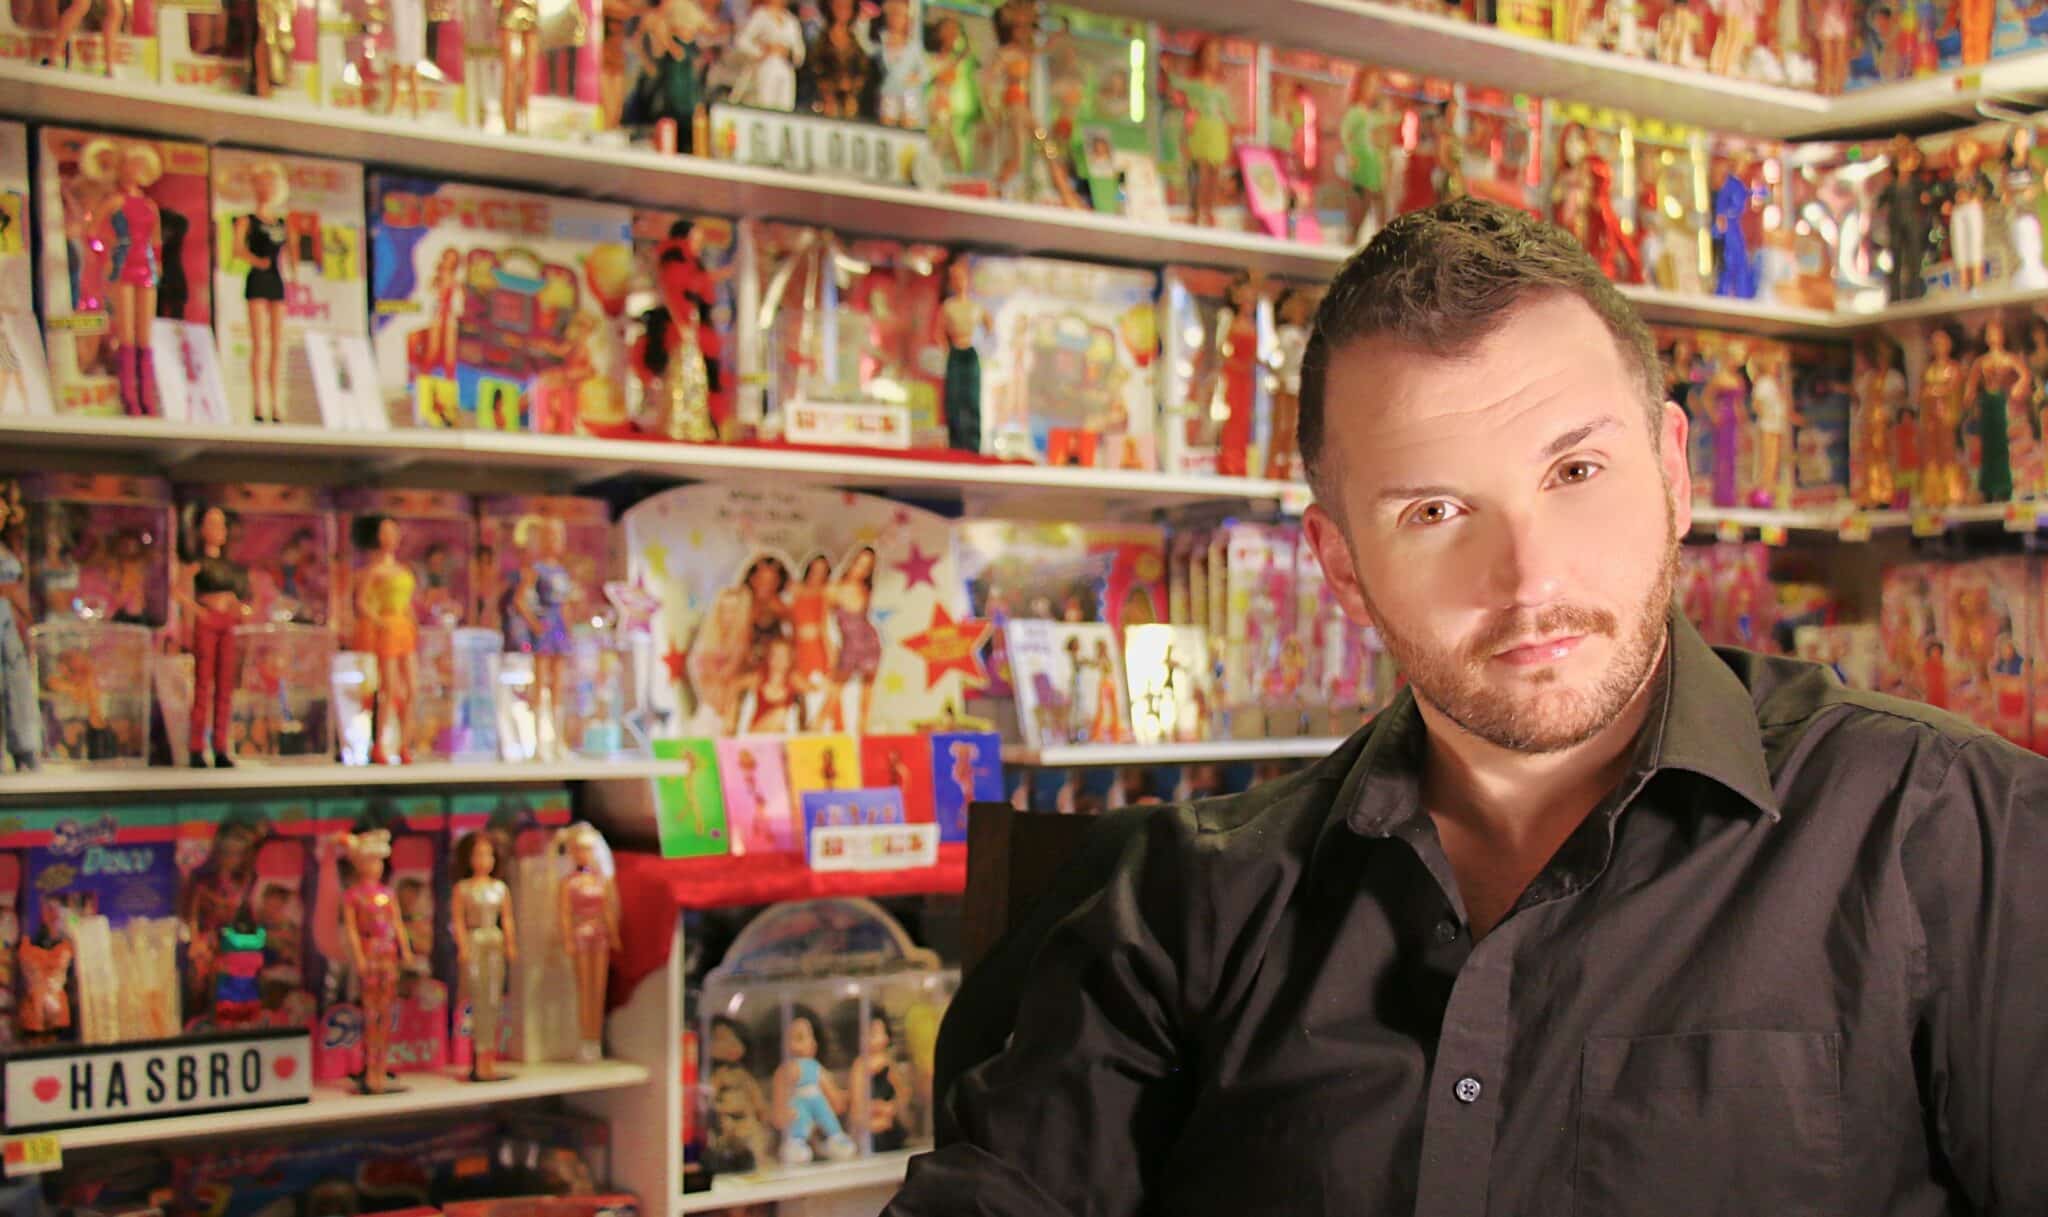 Adam Weatherly with his Spice Girls doll collection in the background. 